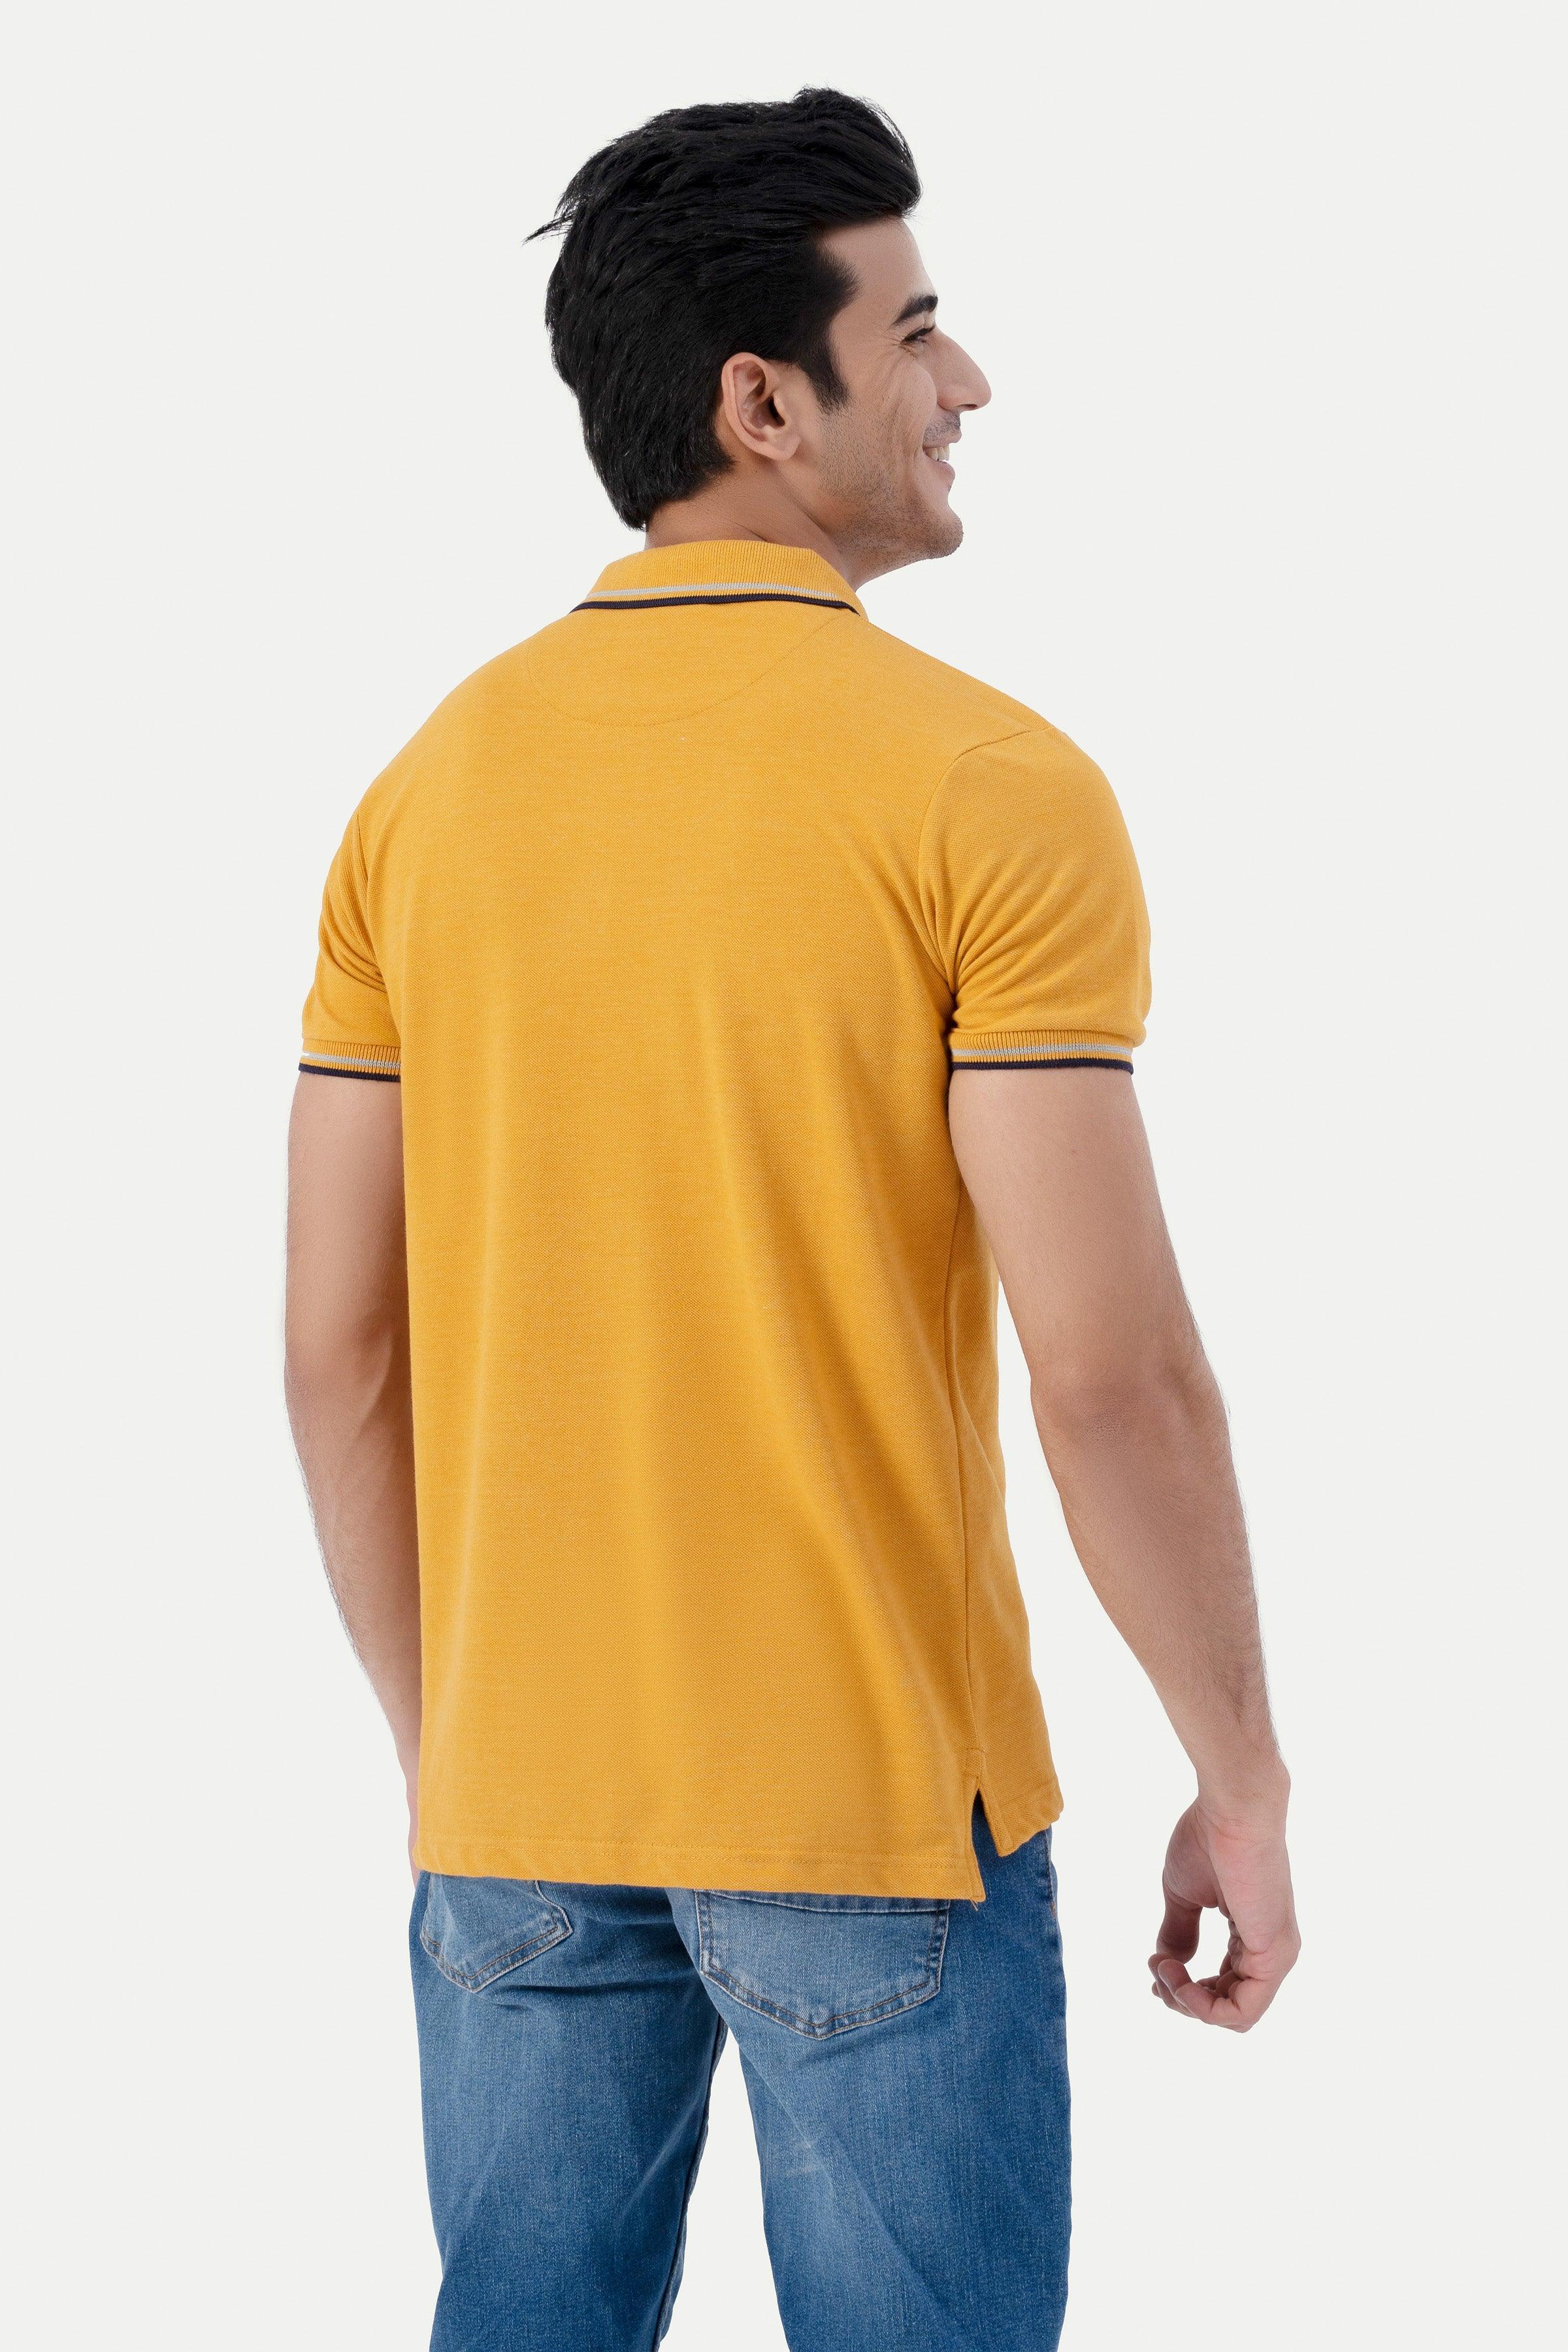 TIPPING POLO MUSTARD MELANGE at Charcoal Clothing